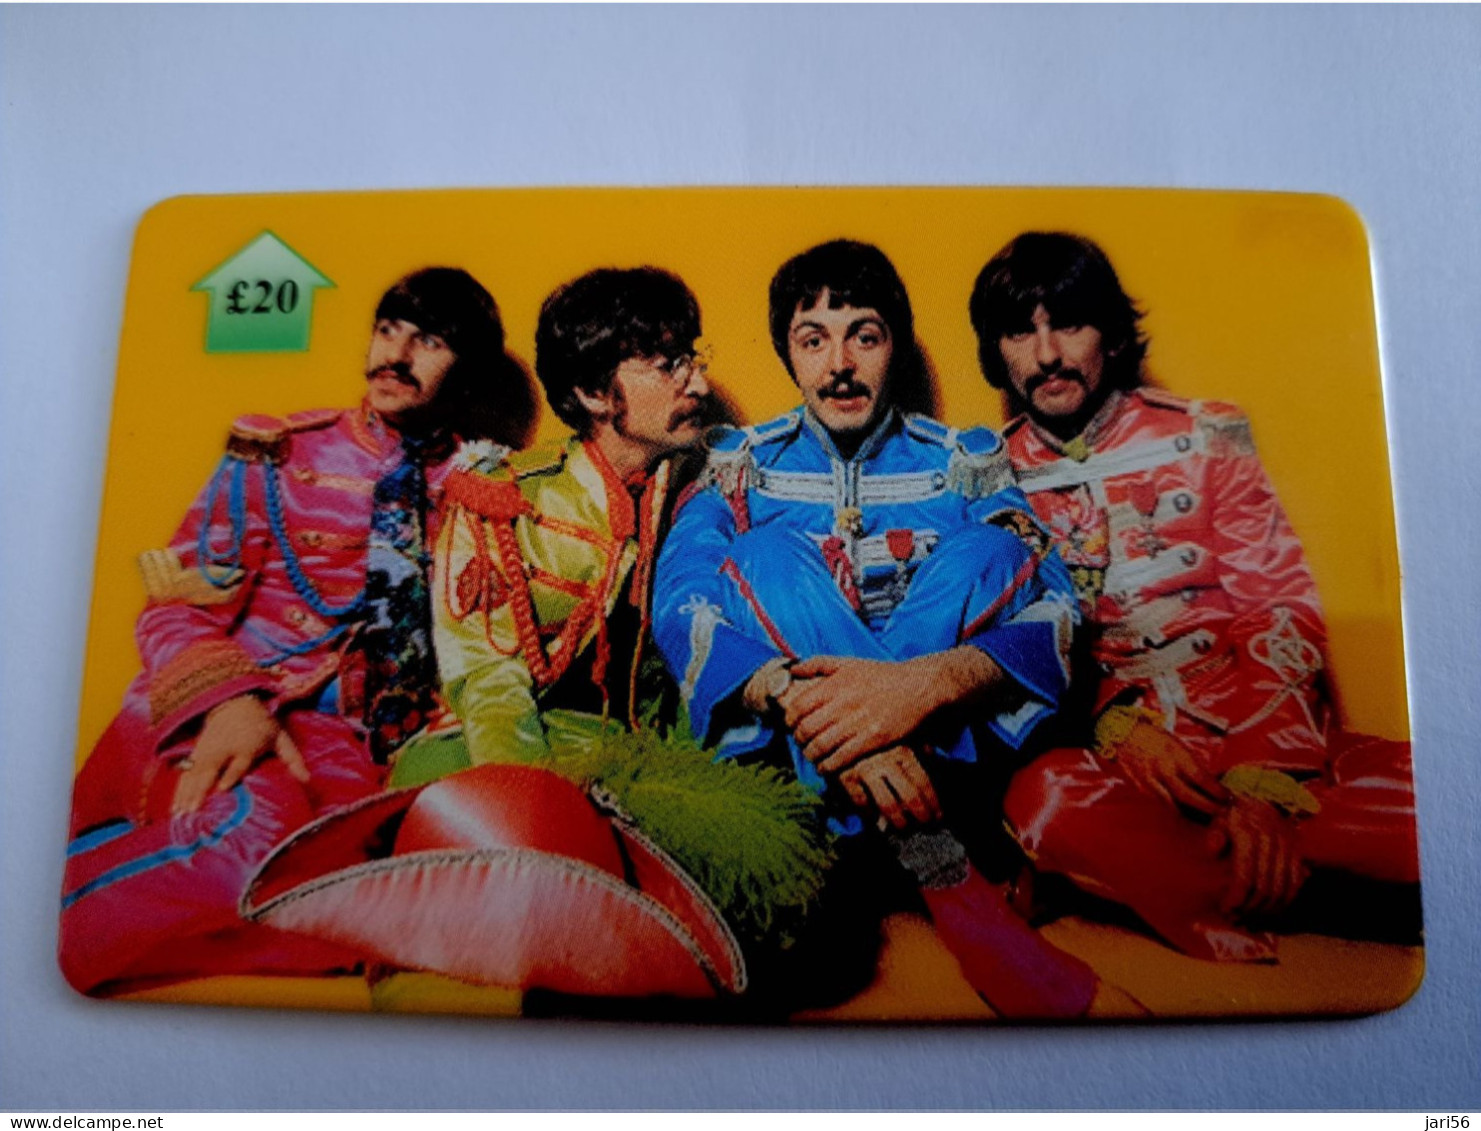 GREAT BRITAIN / 20 POUND /MAGSTRIPE  / BEATLES  PHONECARD/ LIMITED EDITION/  ONLY 500 EX     **15692** - [10] Collections